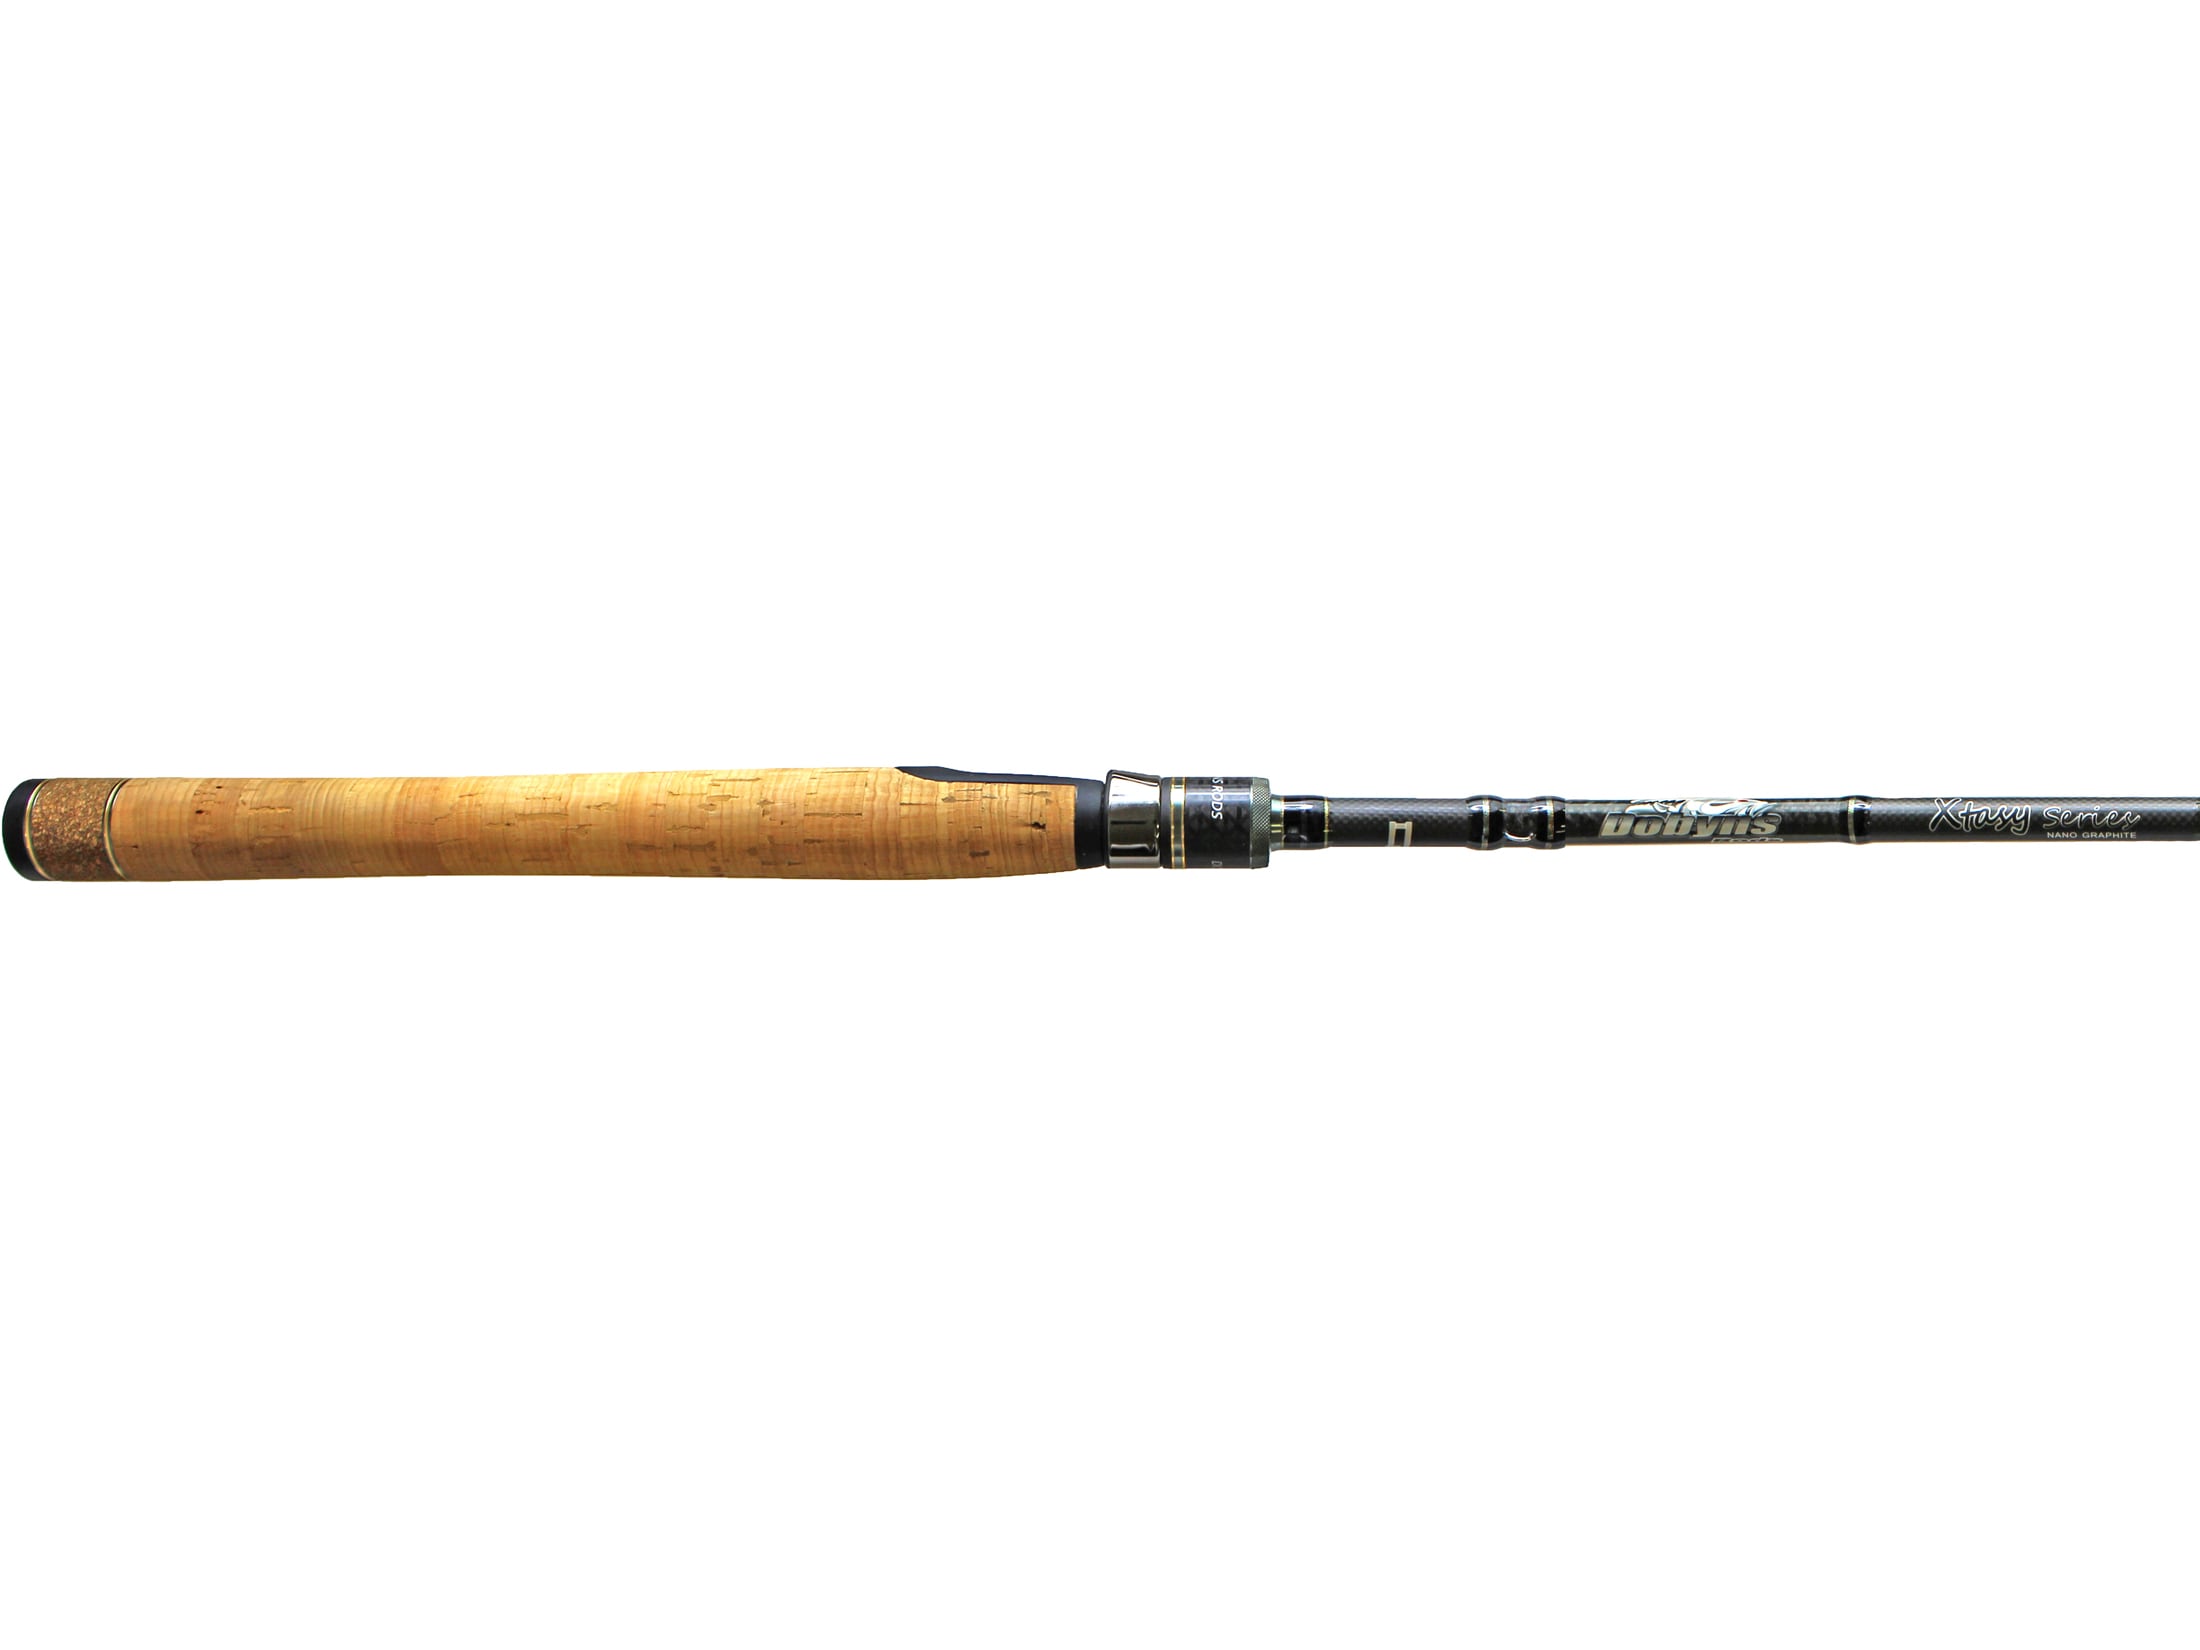 high end rods - Online Exclusive Rate- OFF 64%